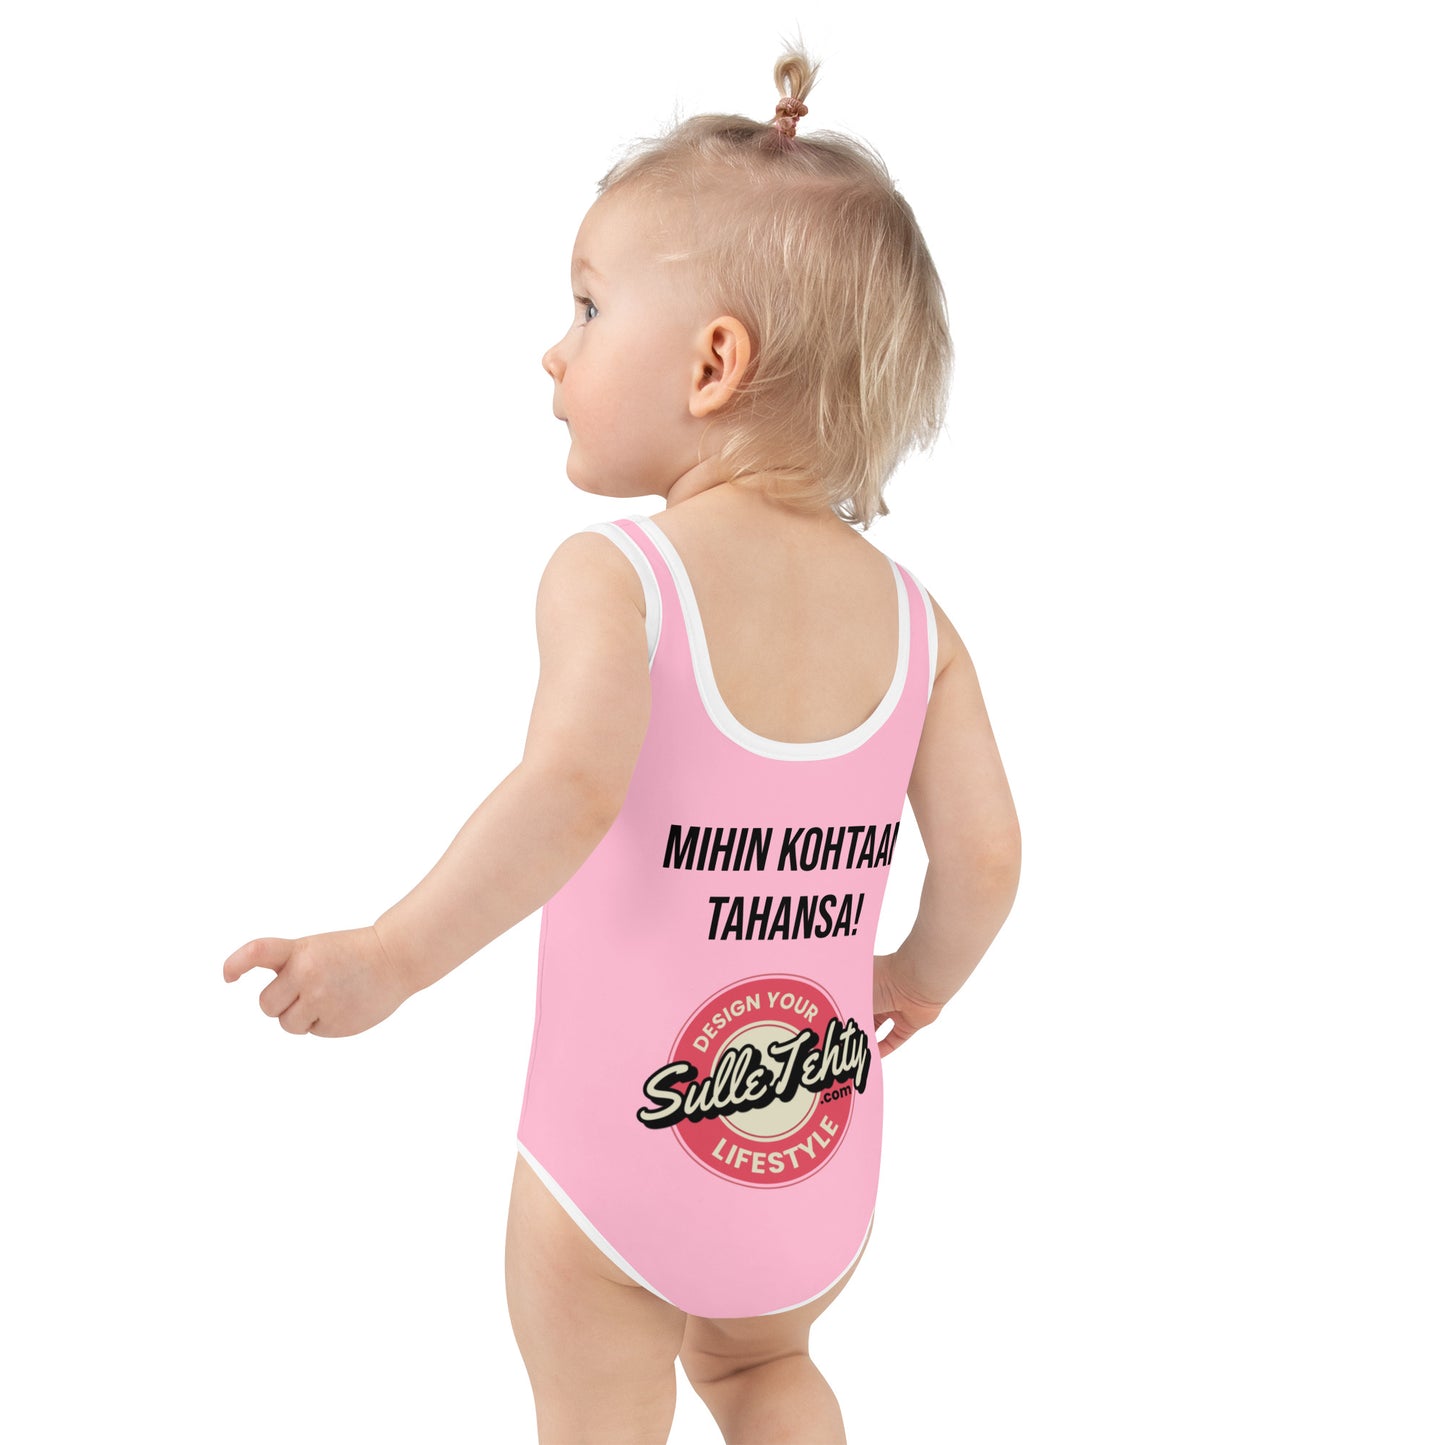 Children's swimsuit with DTG printing